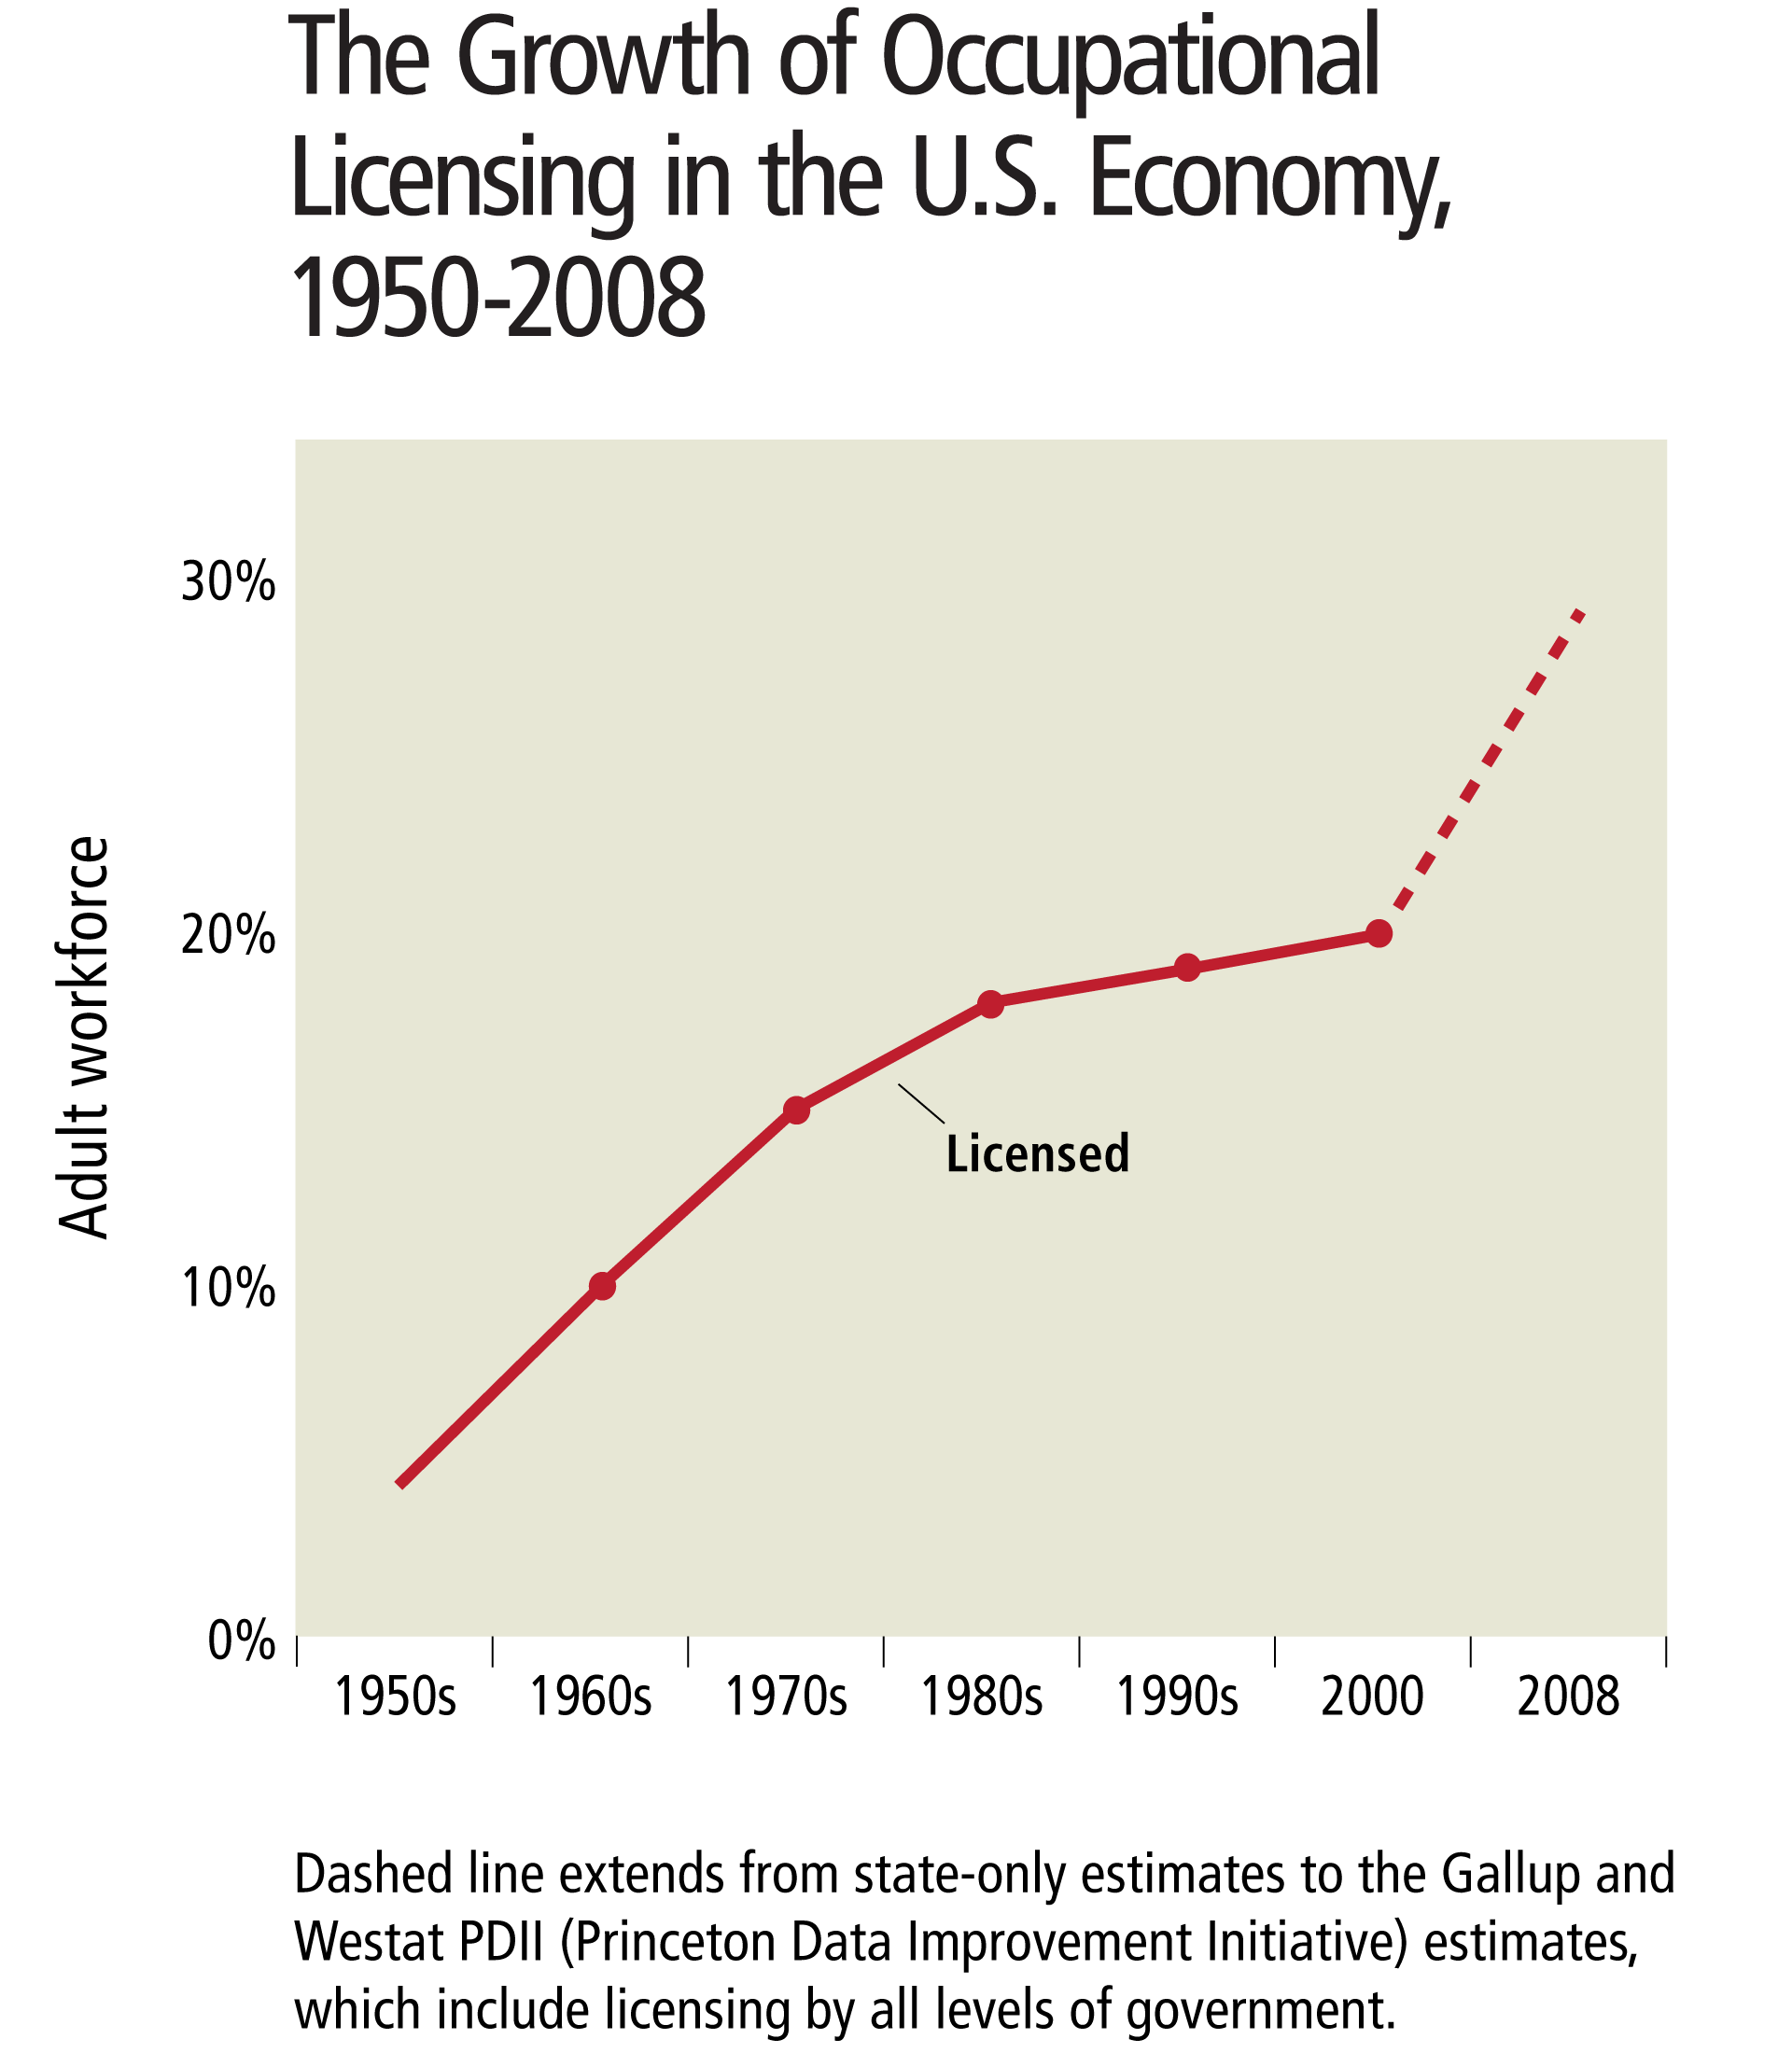 Chart: The Growth of Occupational Licensing in the U.S. Economy, 1950-2008